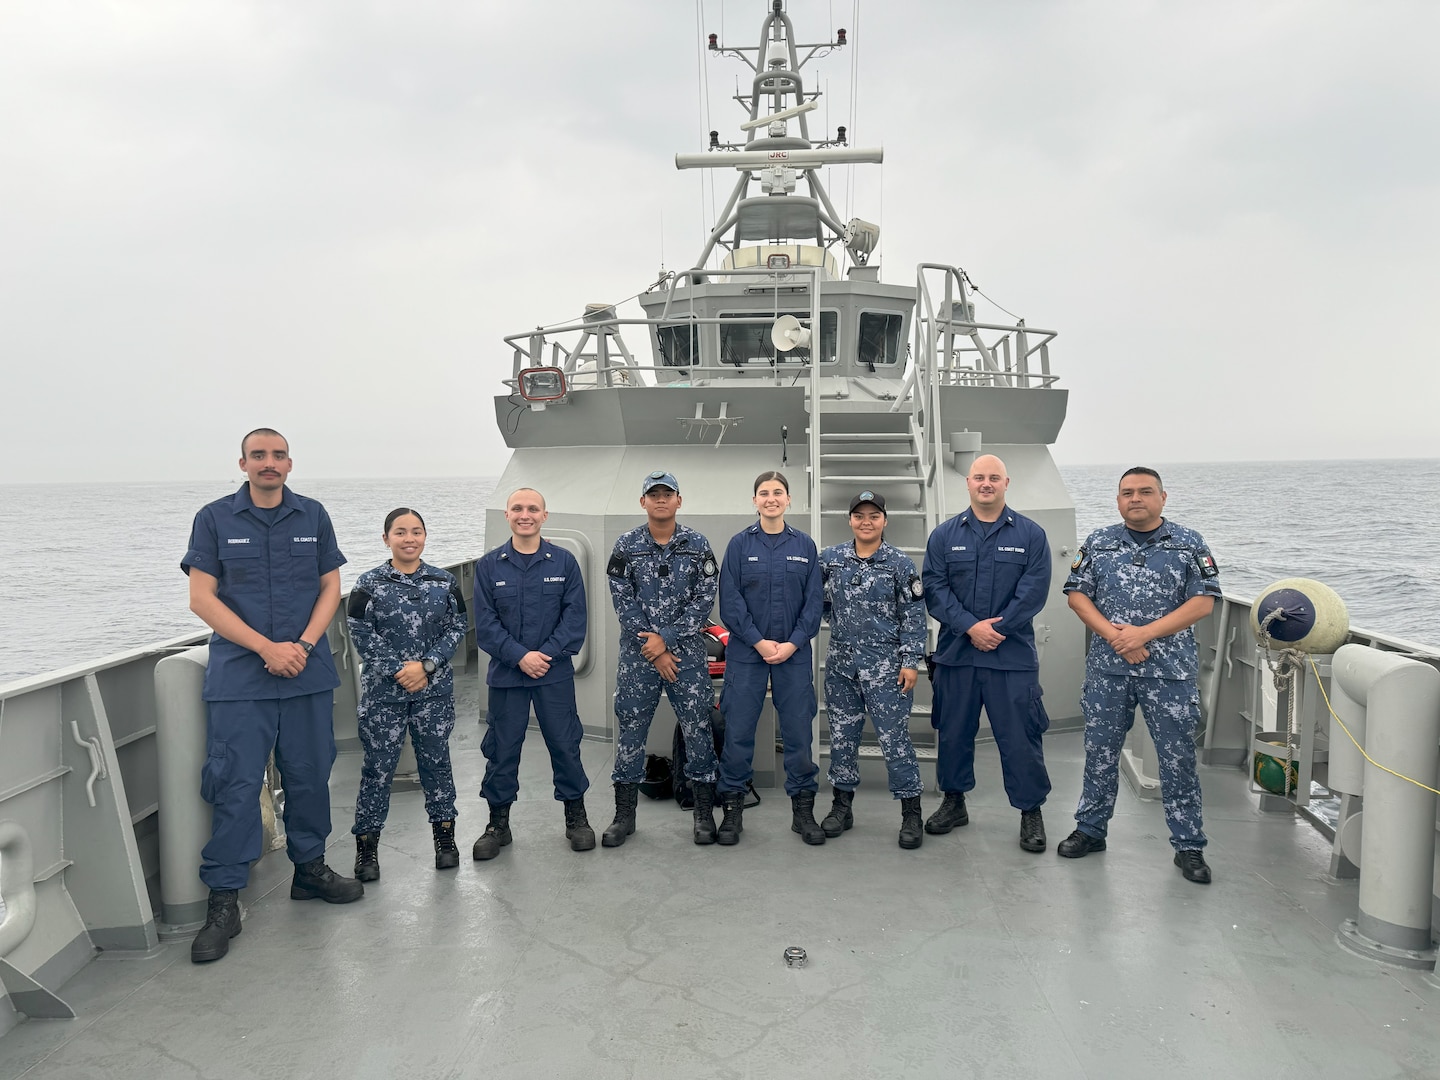 Crew members from U.S. Coast Guard Cutter Diligence (WMEC 616) and Mexican navy patrol vessel ARM Chichen Itza (PC 340) pose for a group photo, March 5, 2024, while conducting a passenger exchange on the International Maritime Boundary in the Gulf of Mexico. Both vessels were conducting patrols to combat illegal, unreported, and unregulated fishing (IUU-F). (U.S. Coast Guard photo by Petty Officer 2nd Class Thor Cocchi)